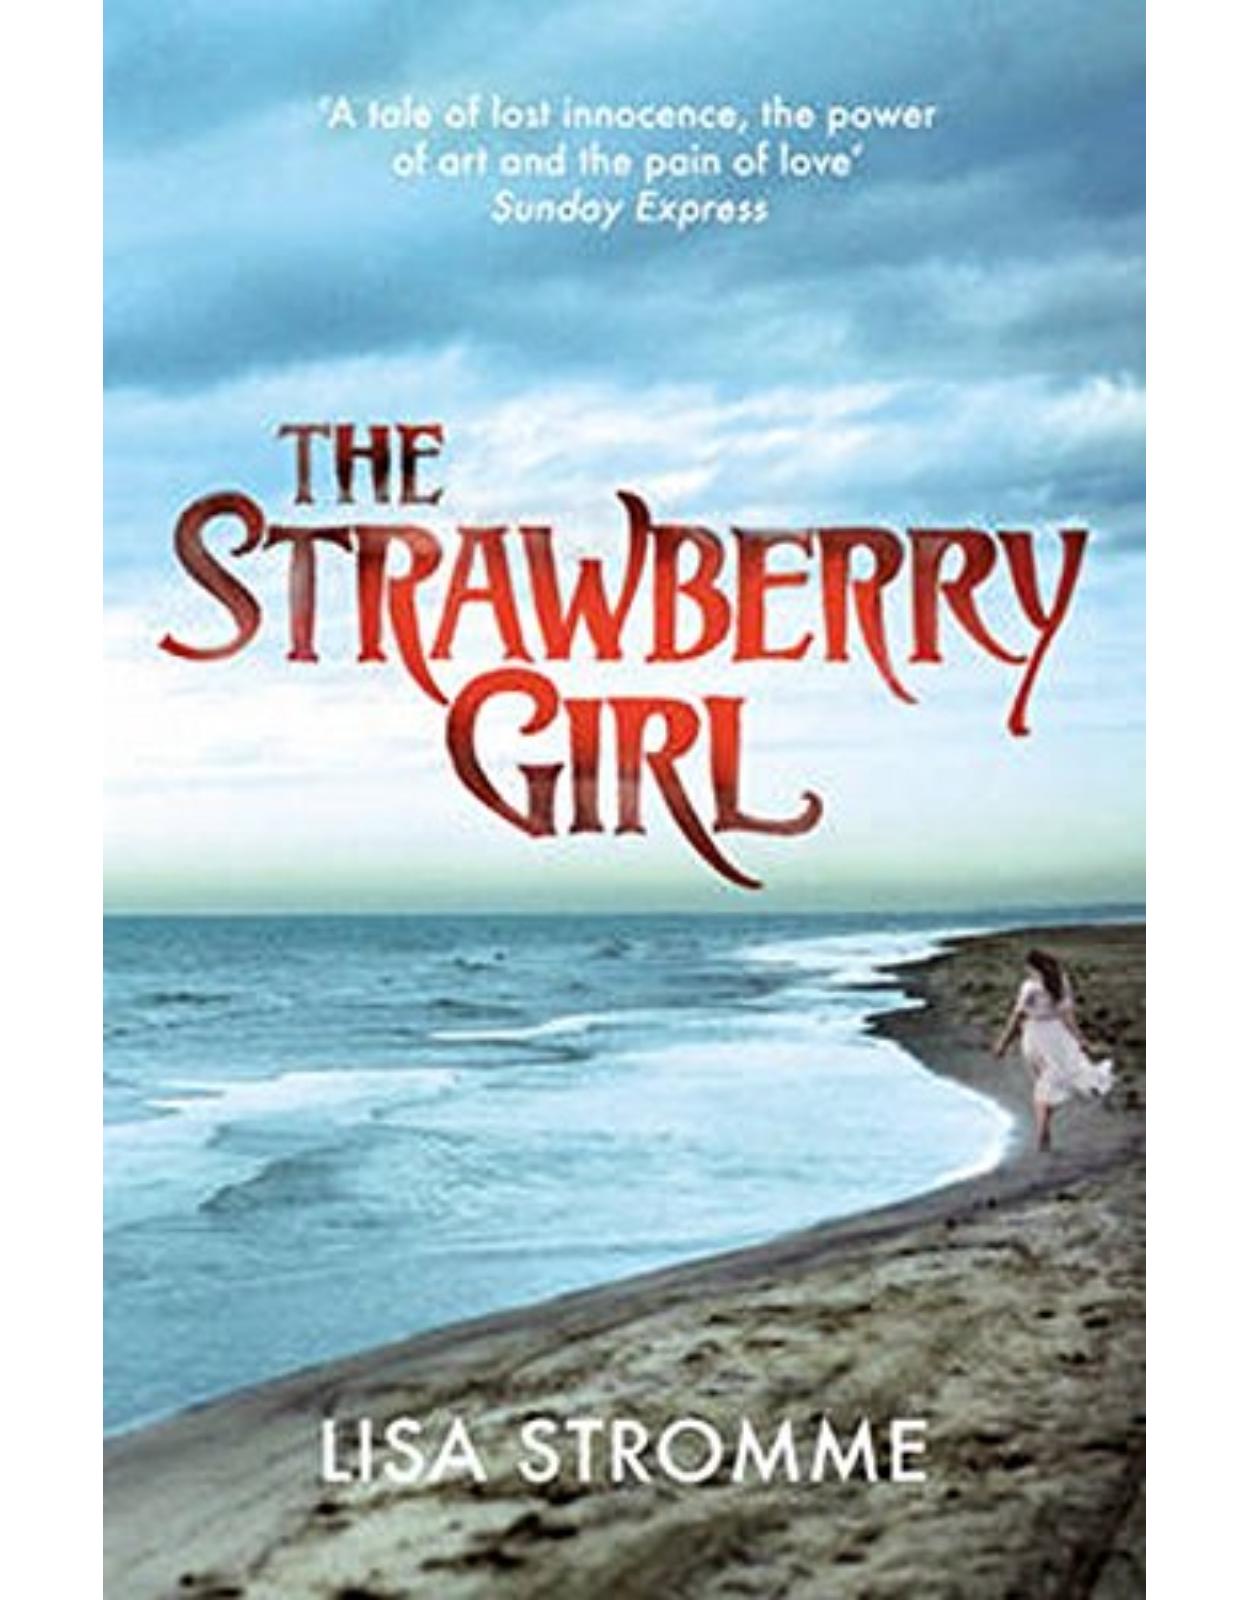 The Strawberry Girl